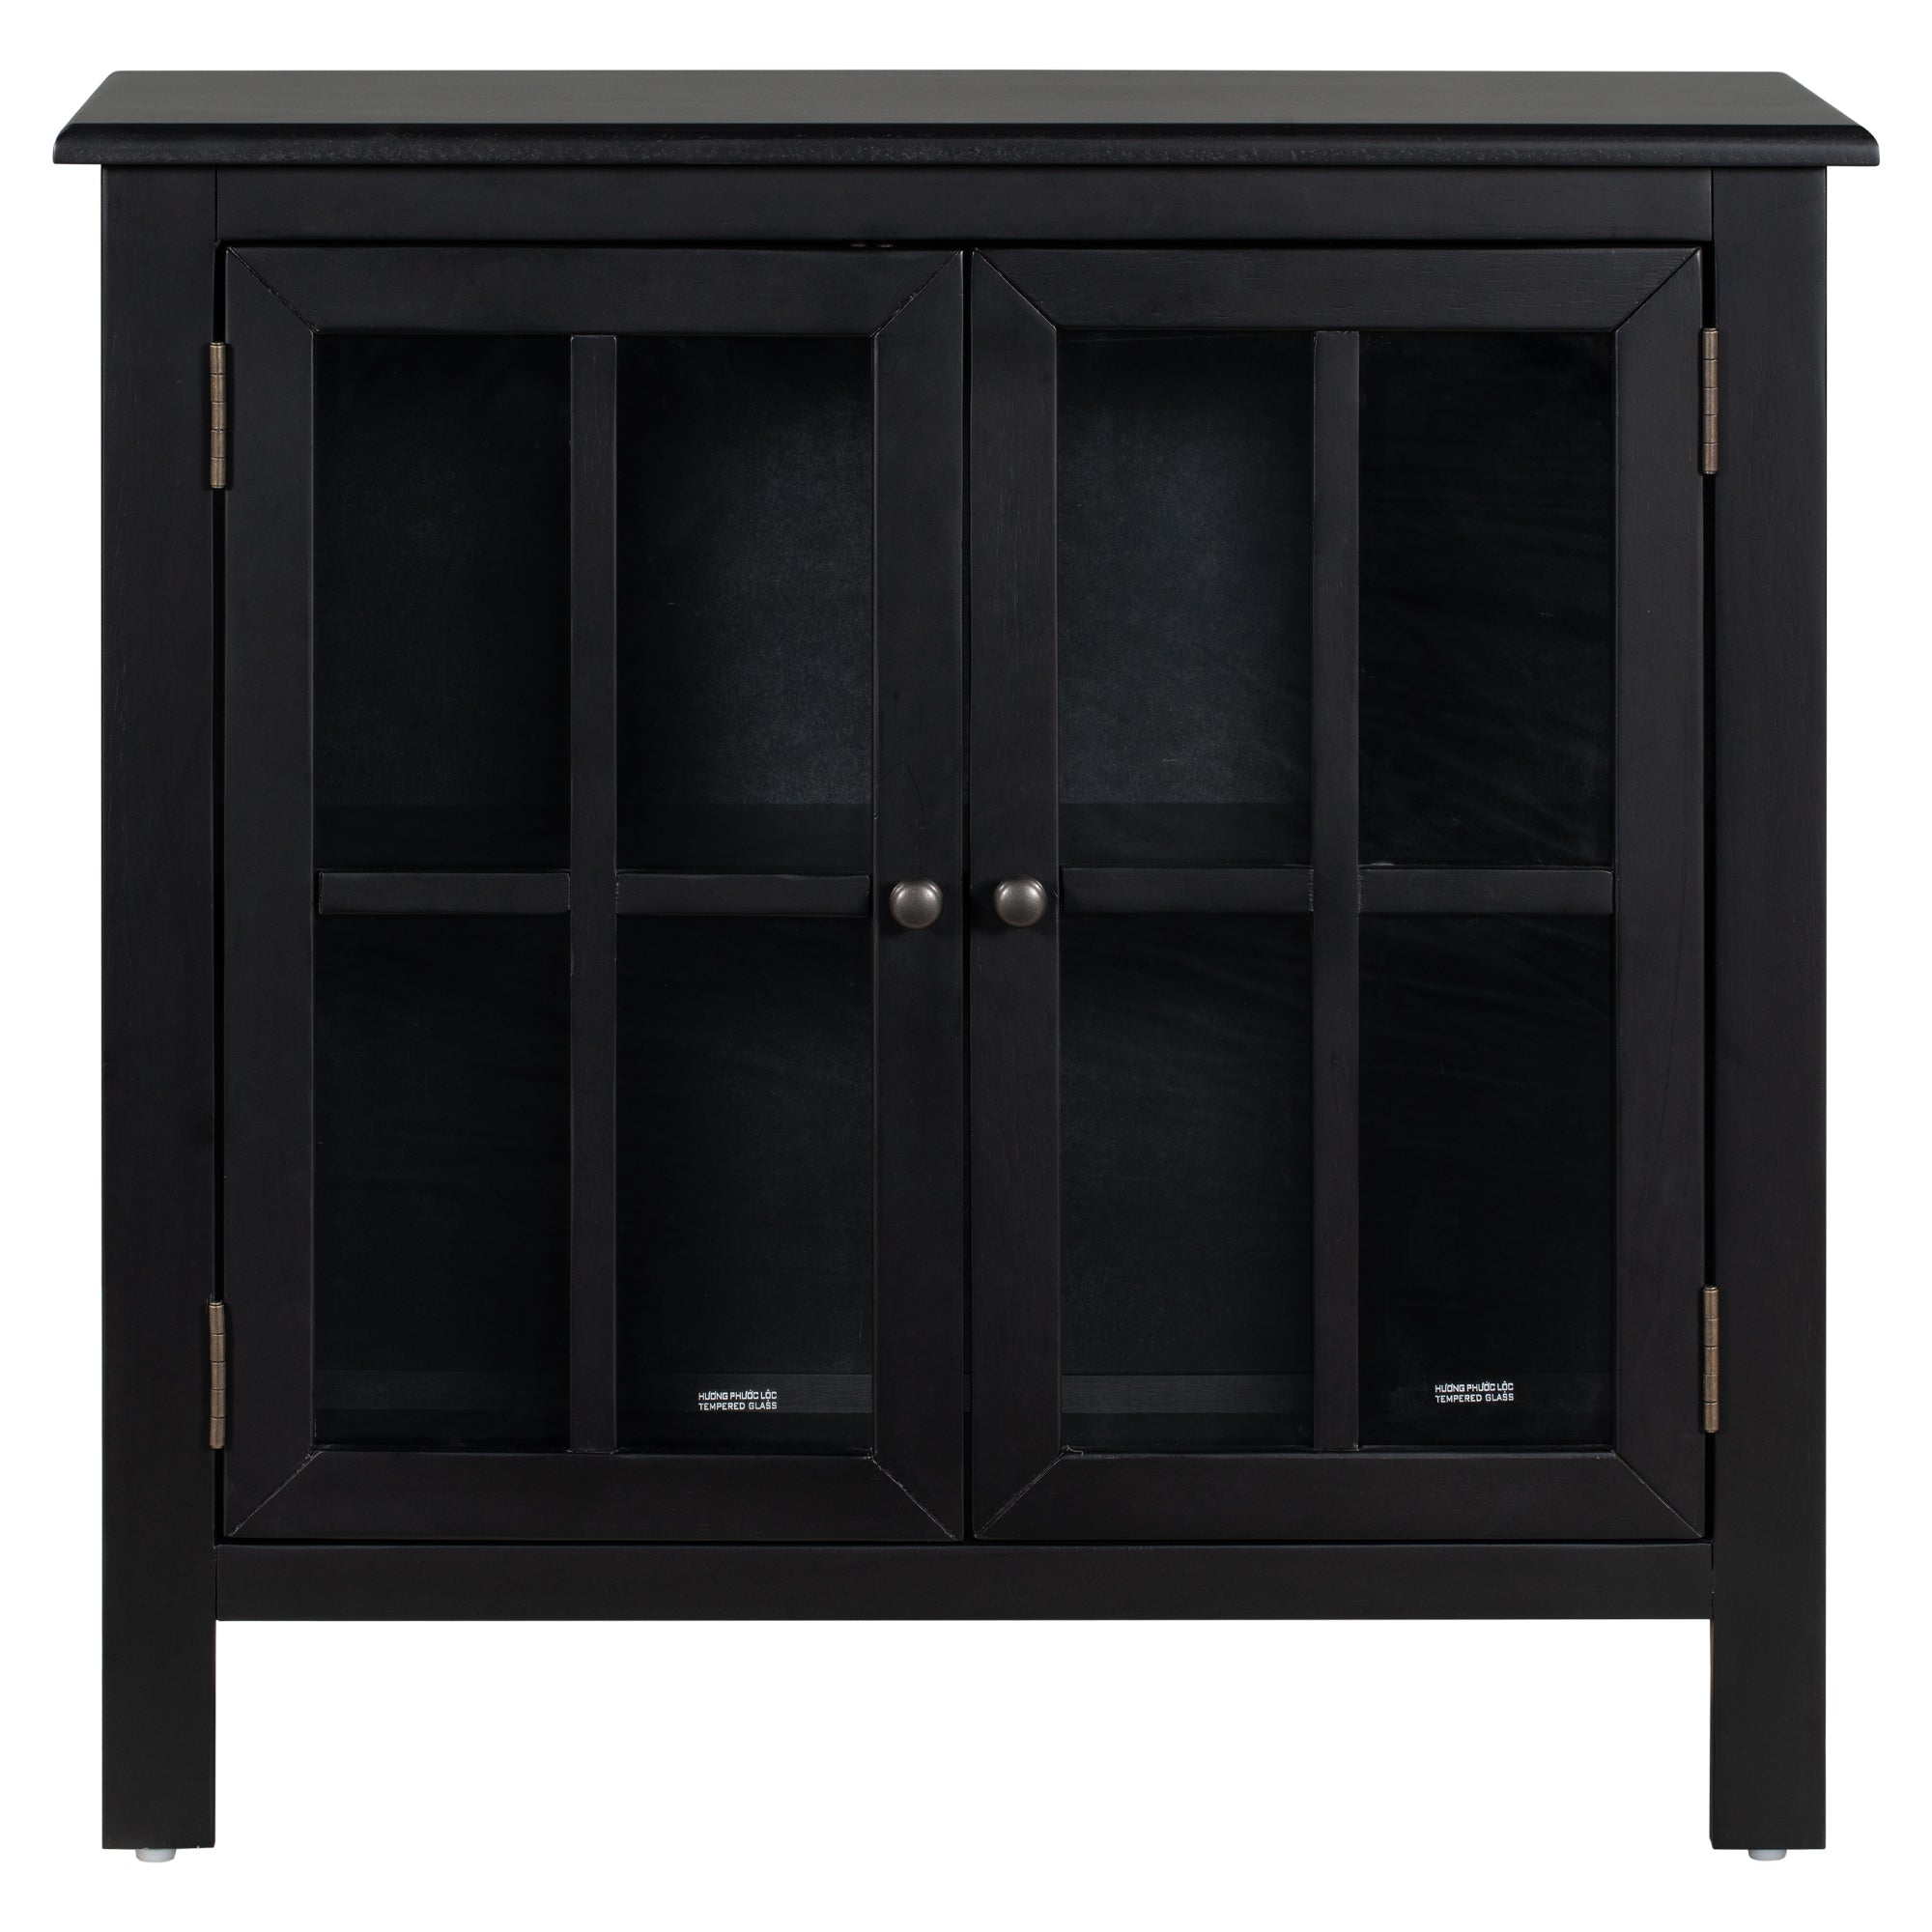 31.5’’ Wood Accent Buffet Sideboard Storage Cabinet with Doors and Adjustable Shelf (Black)